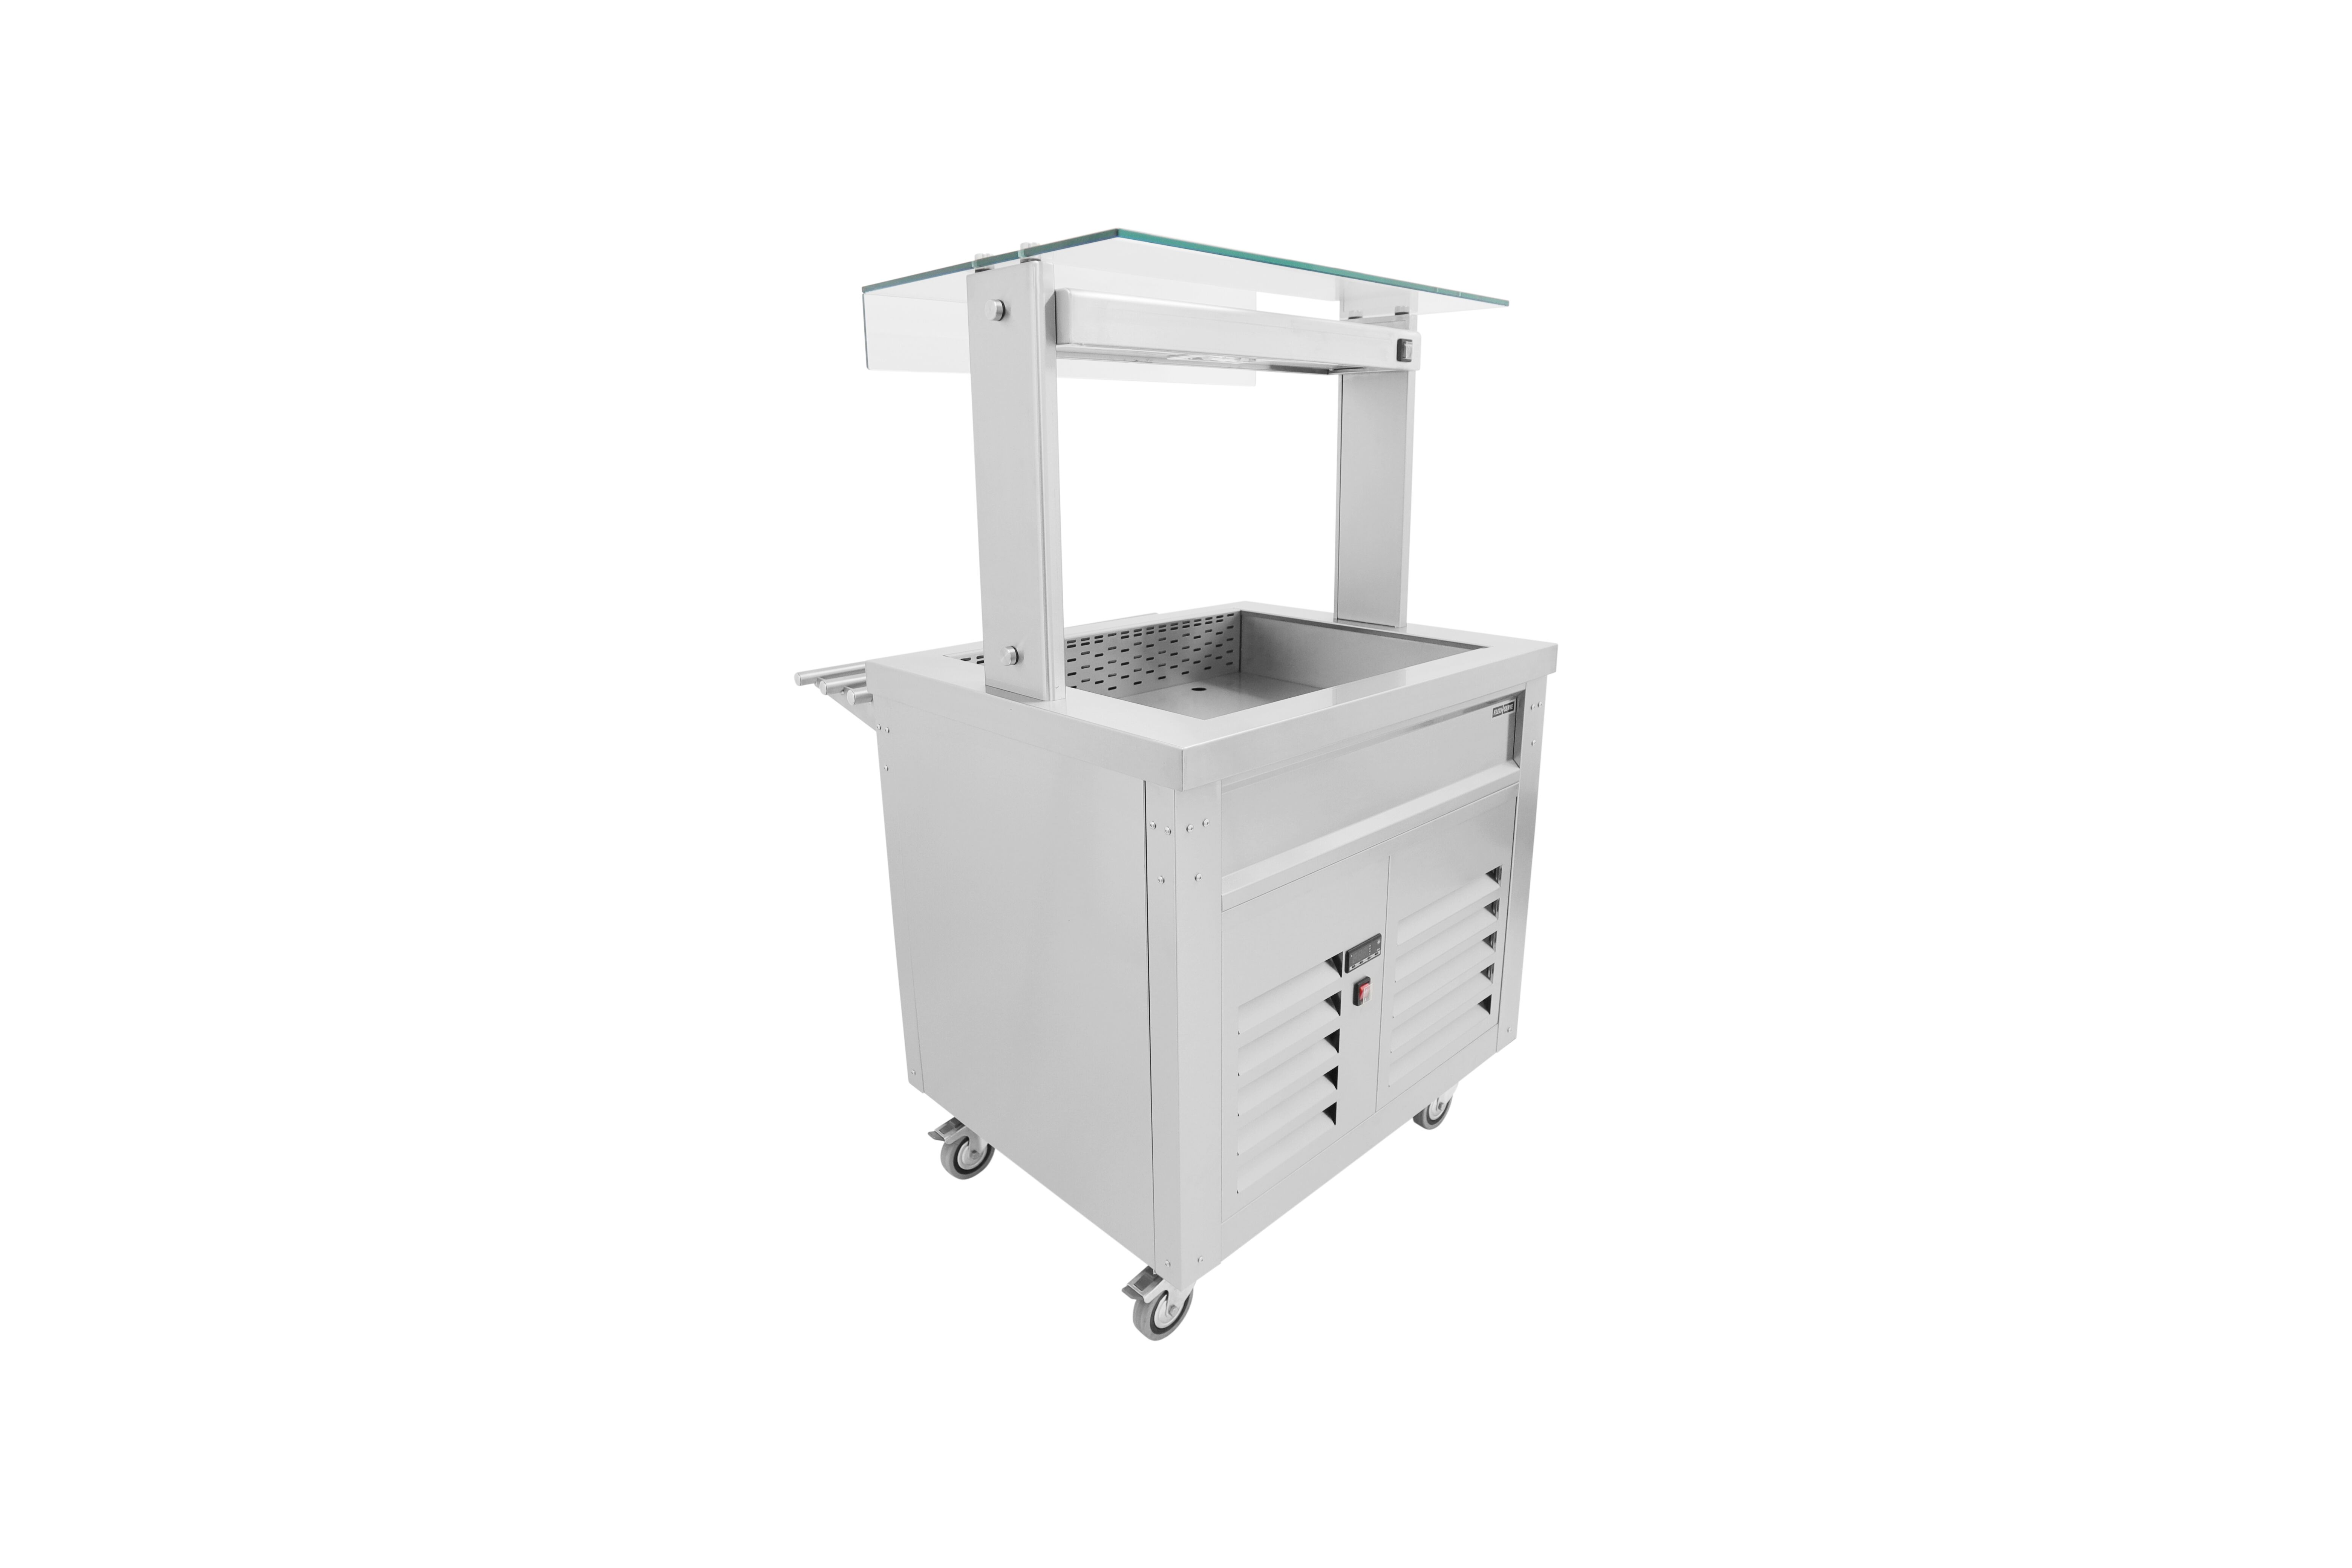 Parry FS-RW5 - Flexi Serve with Refrigerated Well and LED Illuminated Gantry